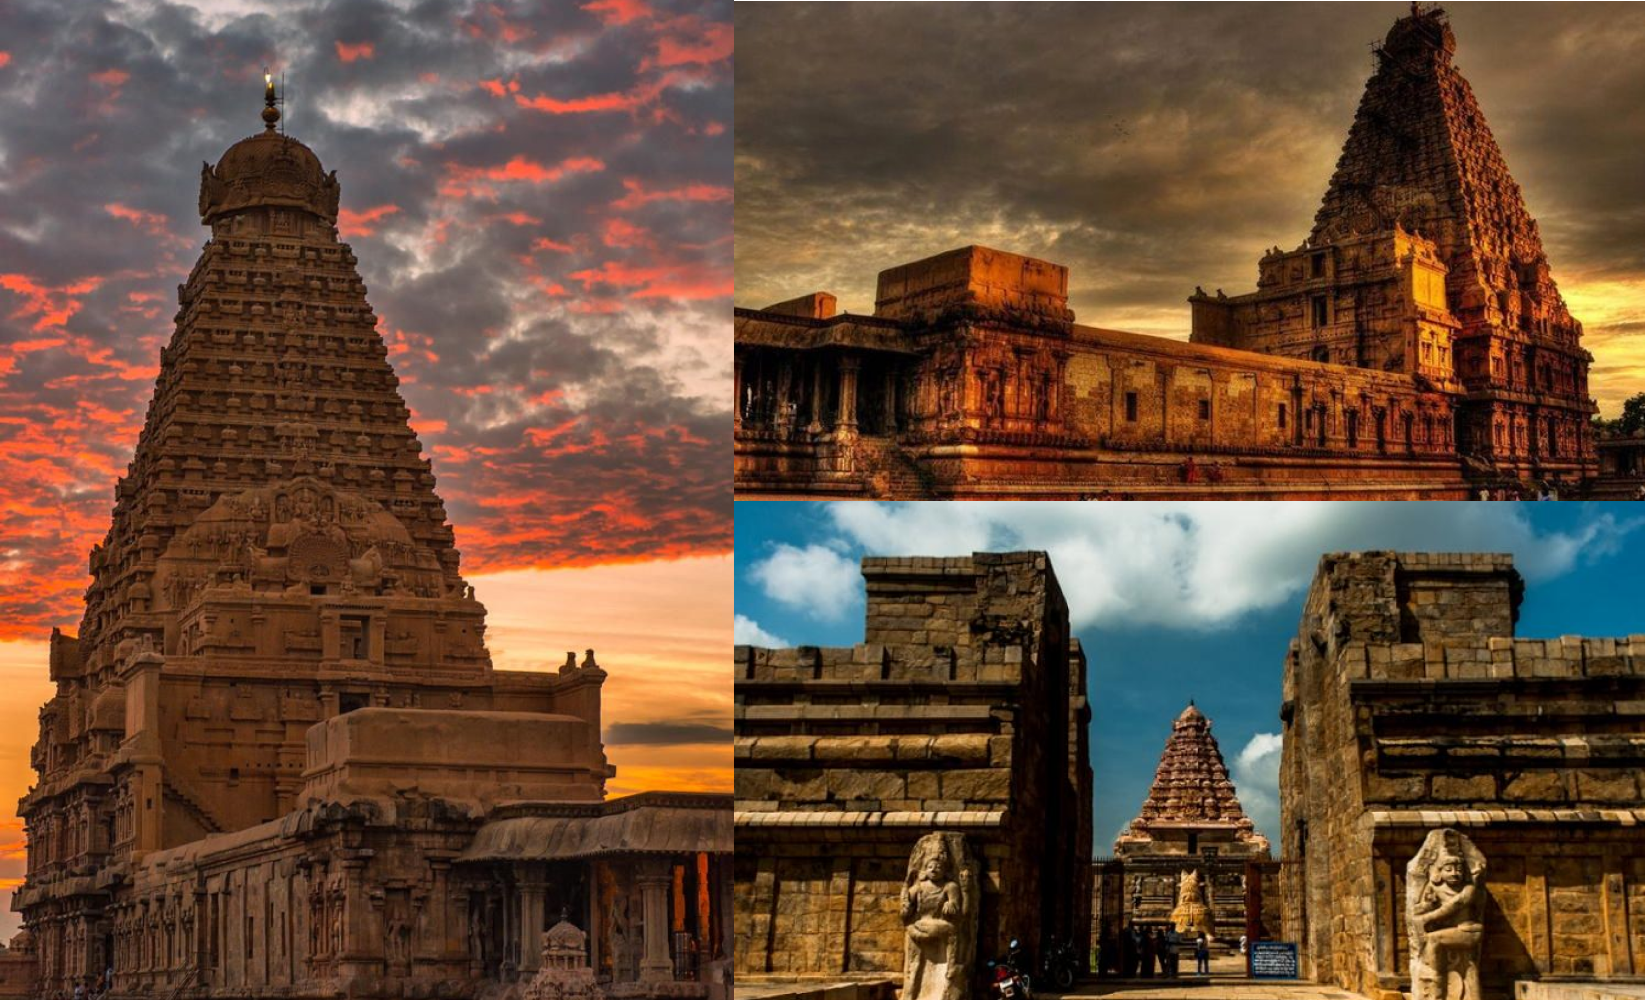 Central India Travel Guide